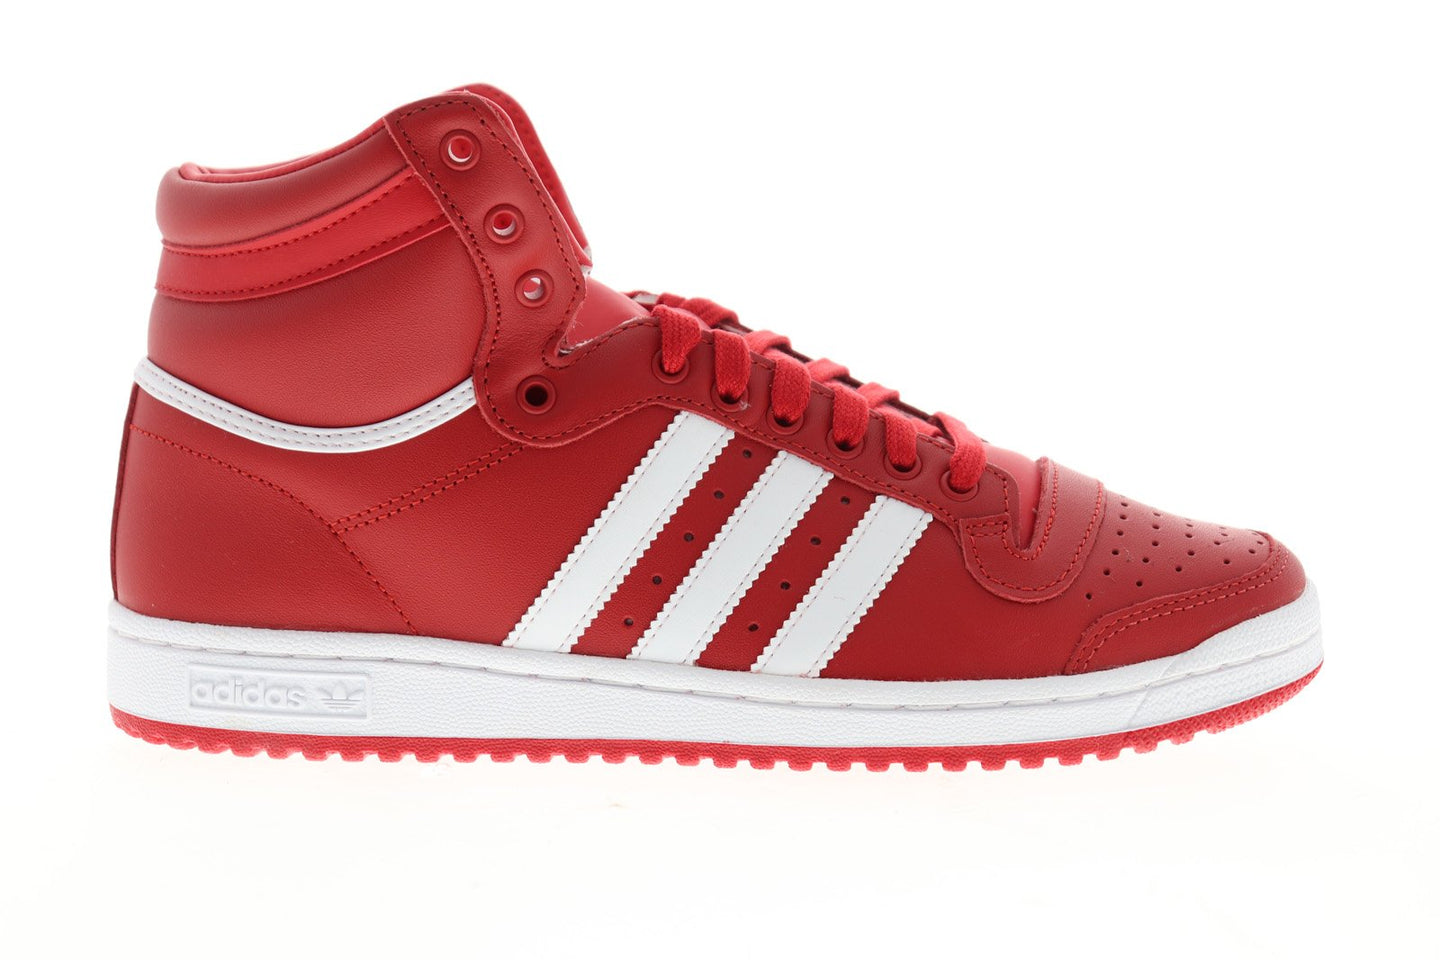 Adidas Top Ten HI EF2518 Mens Red Leather High Top Basketball Sneakers ...